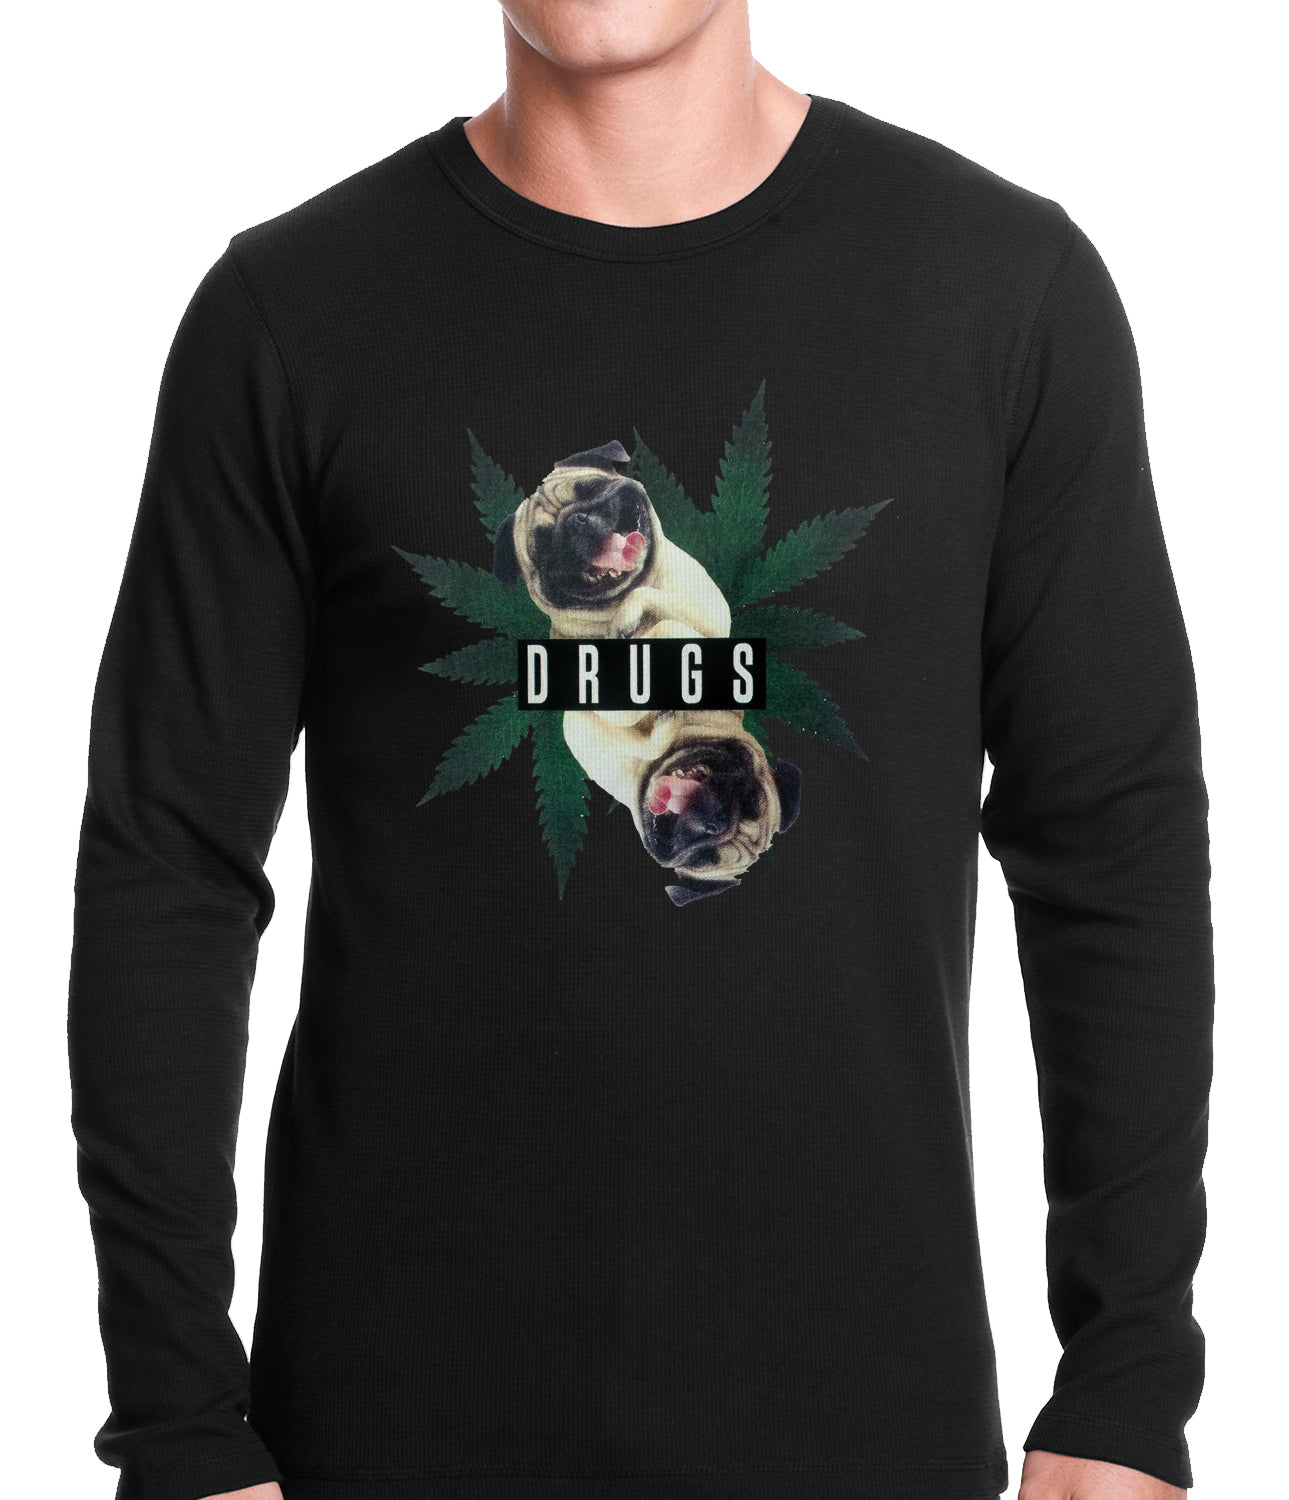 Pugs and Drugs Pot Leaf Thermal Shirt